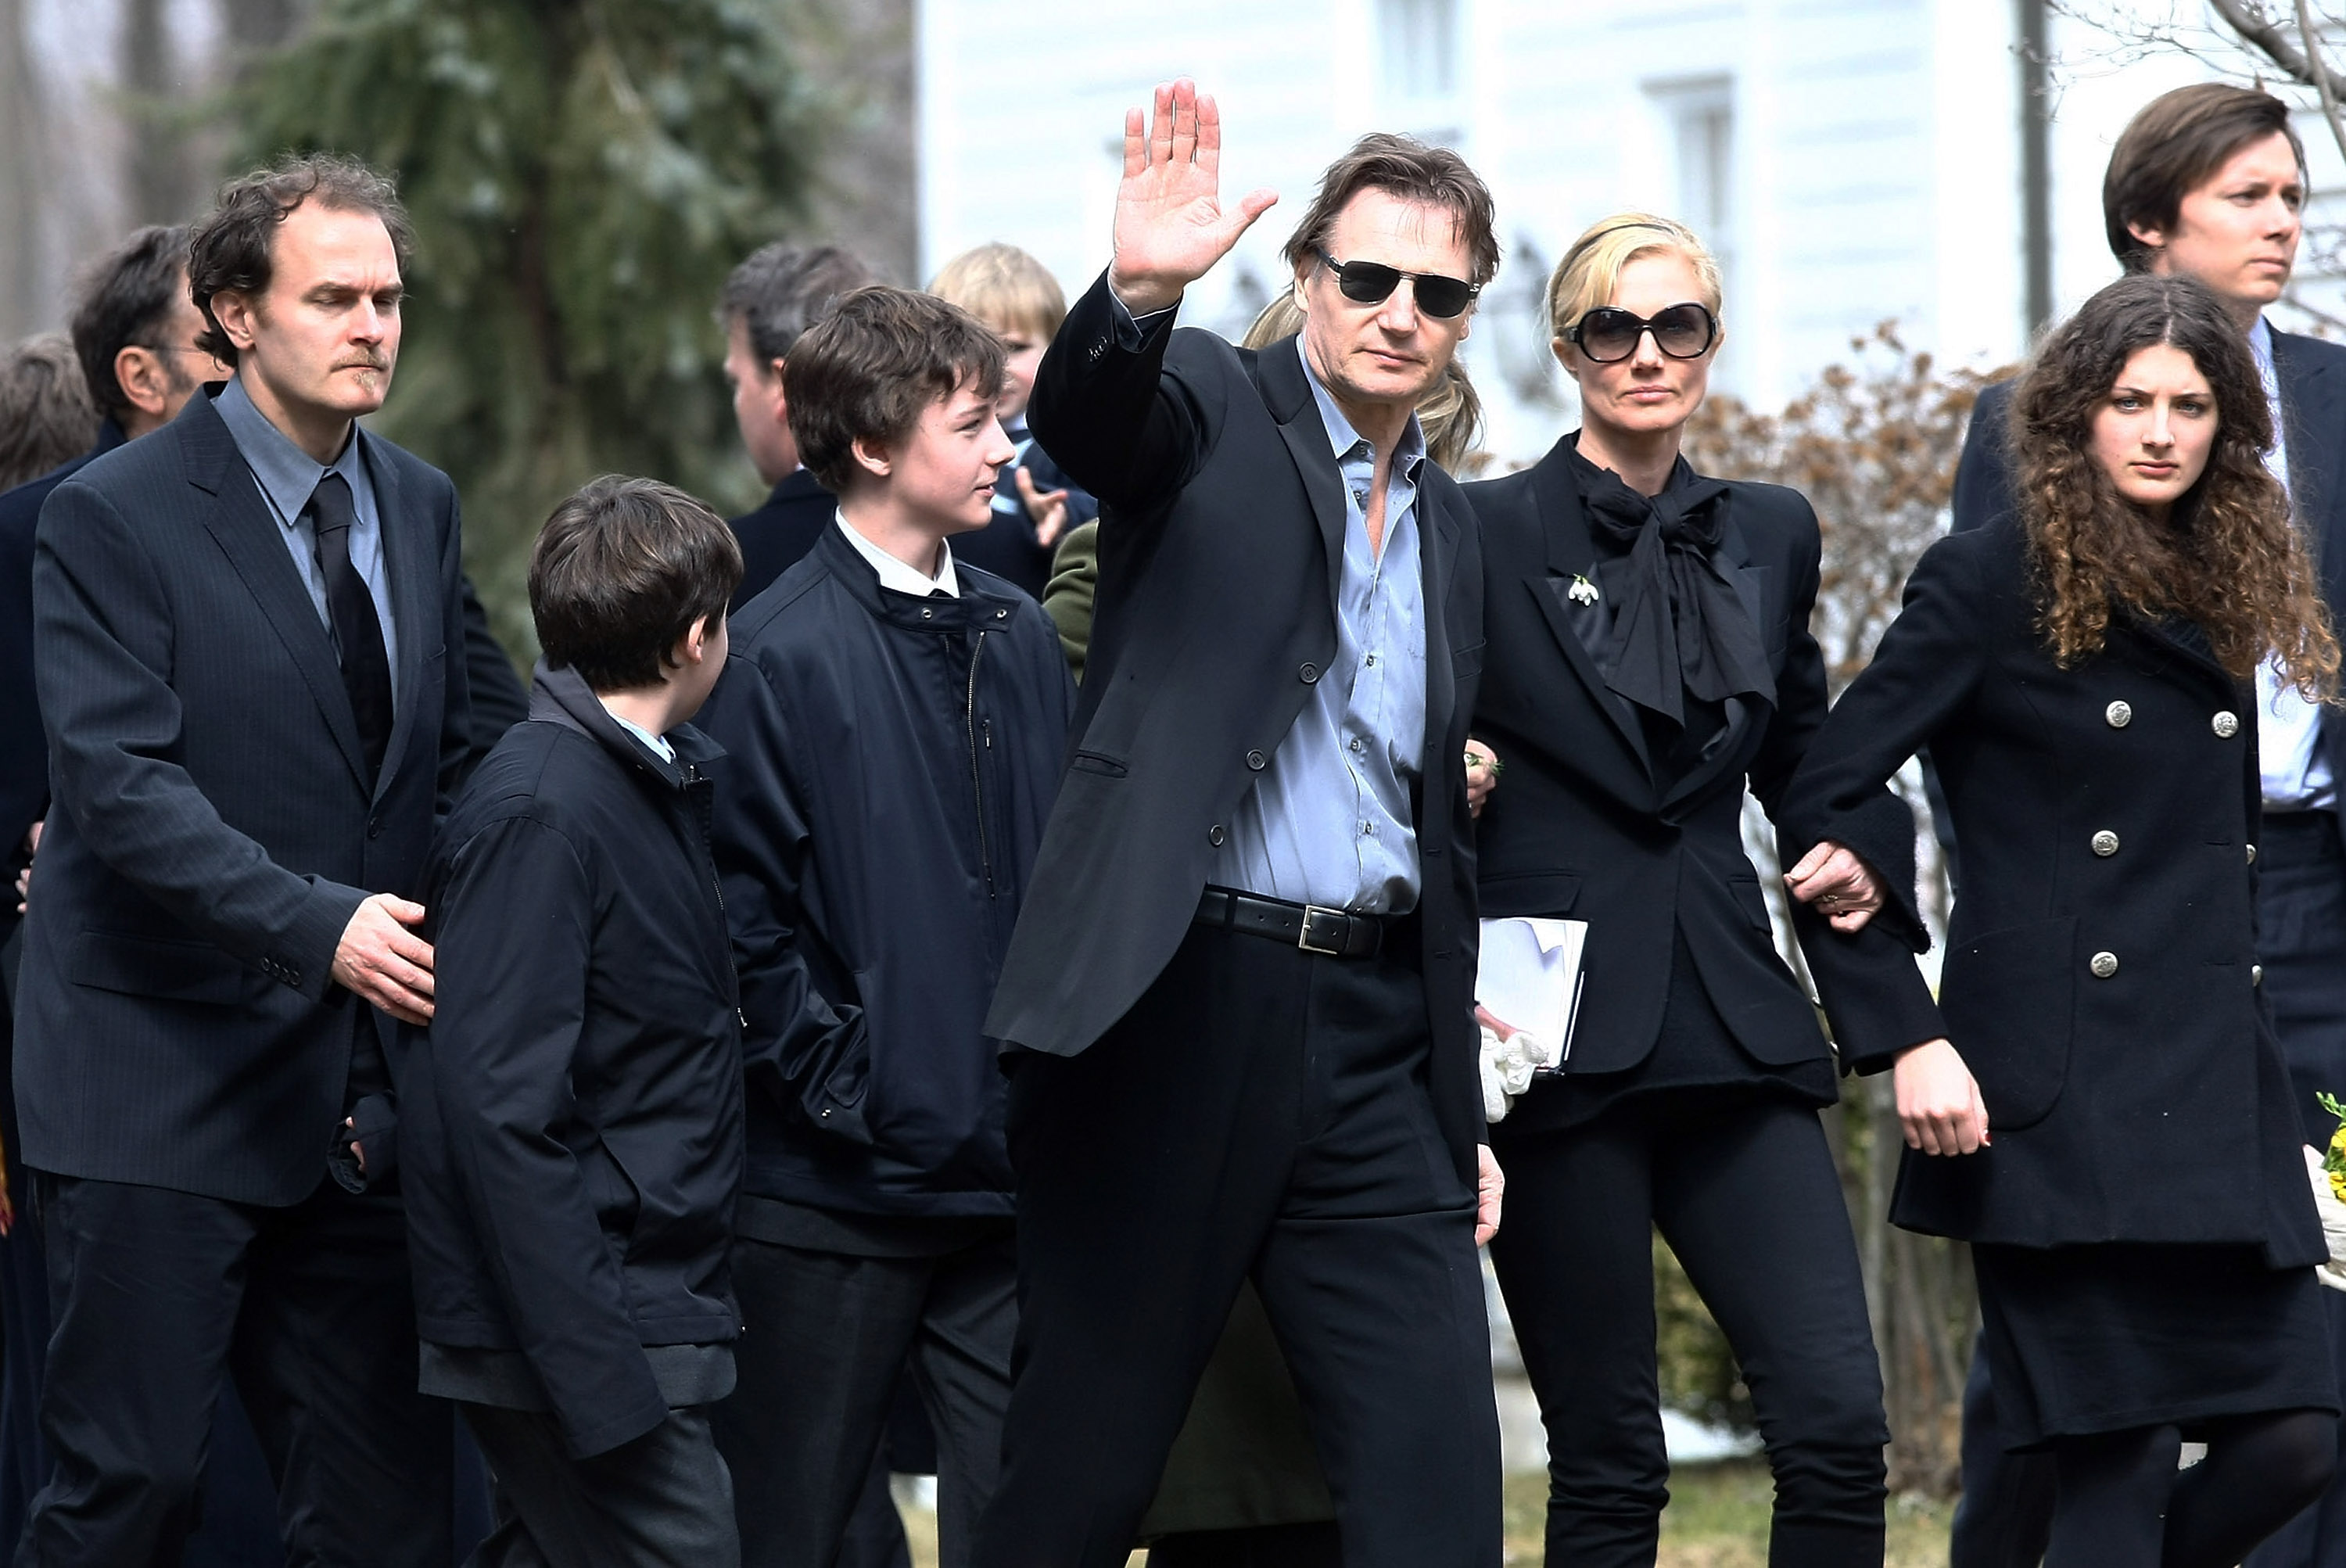 Liam Neeson (waving) with (L-R) screenwriter Carlo Gabriel Nero, son Daniel Neeson, son Micheal Neeson, sister Joely Richardson, and niece Daisy Bevan arrive for the funeral of actress Natasha Richardson at St. Peter's Lithgow Episcopal Church on March 22, 2009, in New York | Source: Getty Images